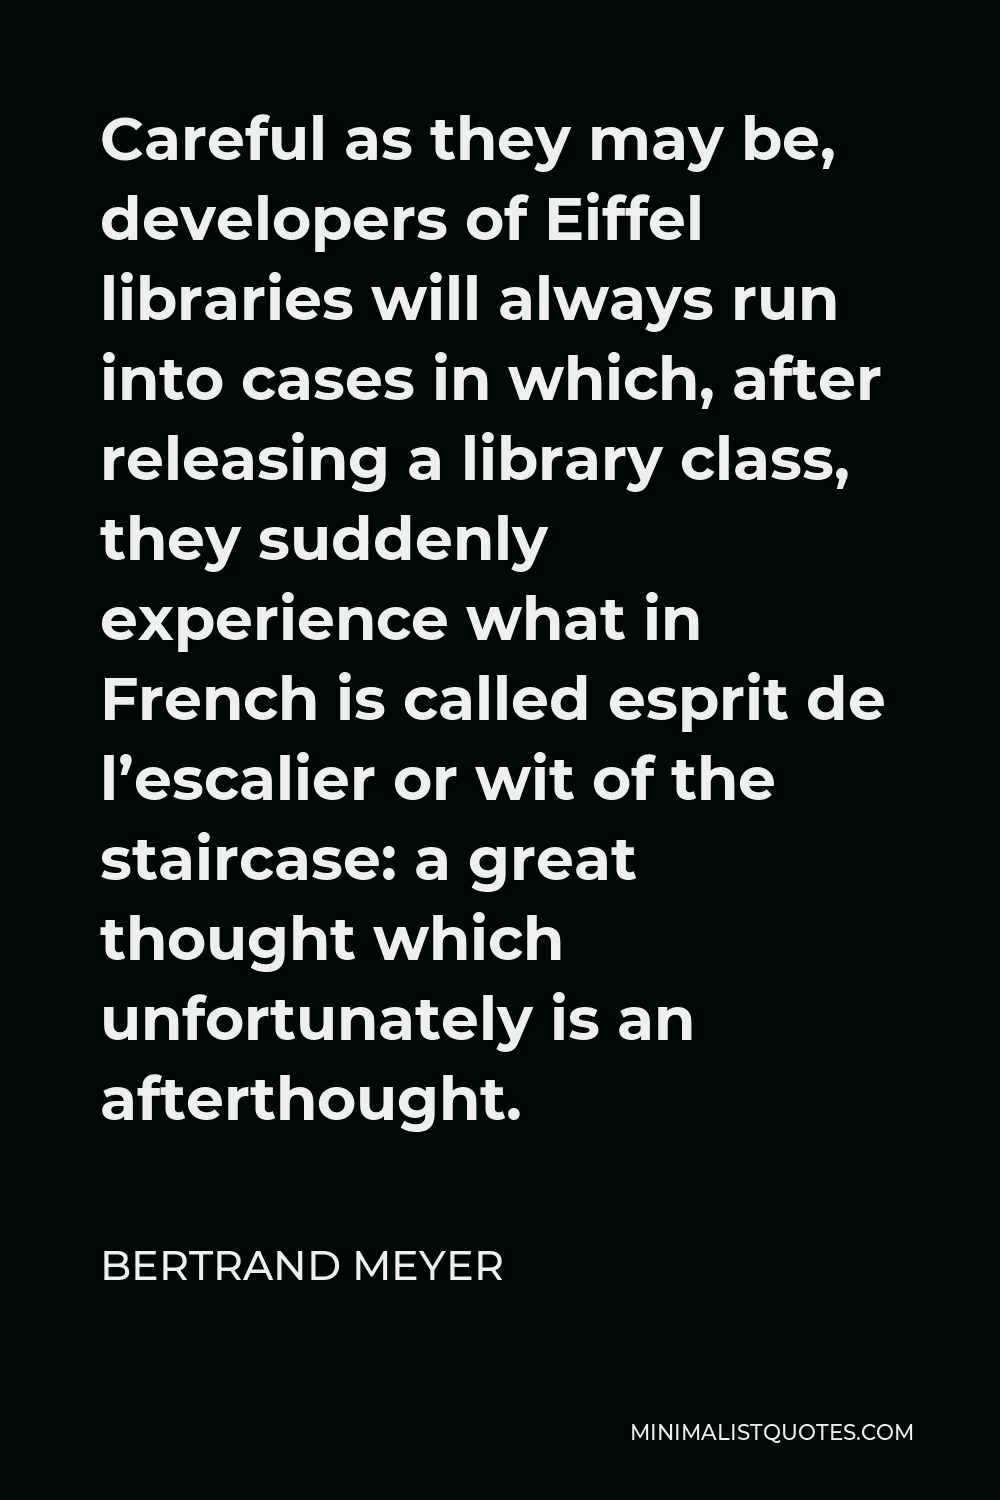 Bertrand Meyer Quote - Careful as they may be, developers of Eiffel libraries will always run into cases in which, after releasing a library class, they suddenly experience what in French is called esprit de l’escalier or wit of the staircase: a great thought which unfortunately is an afterthought.